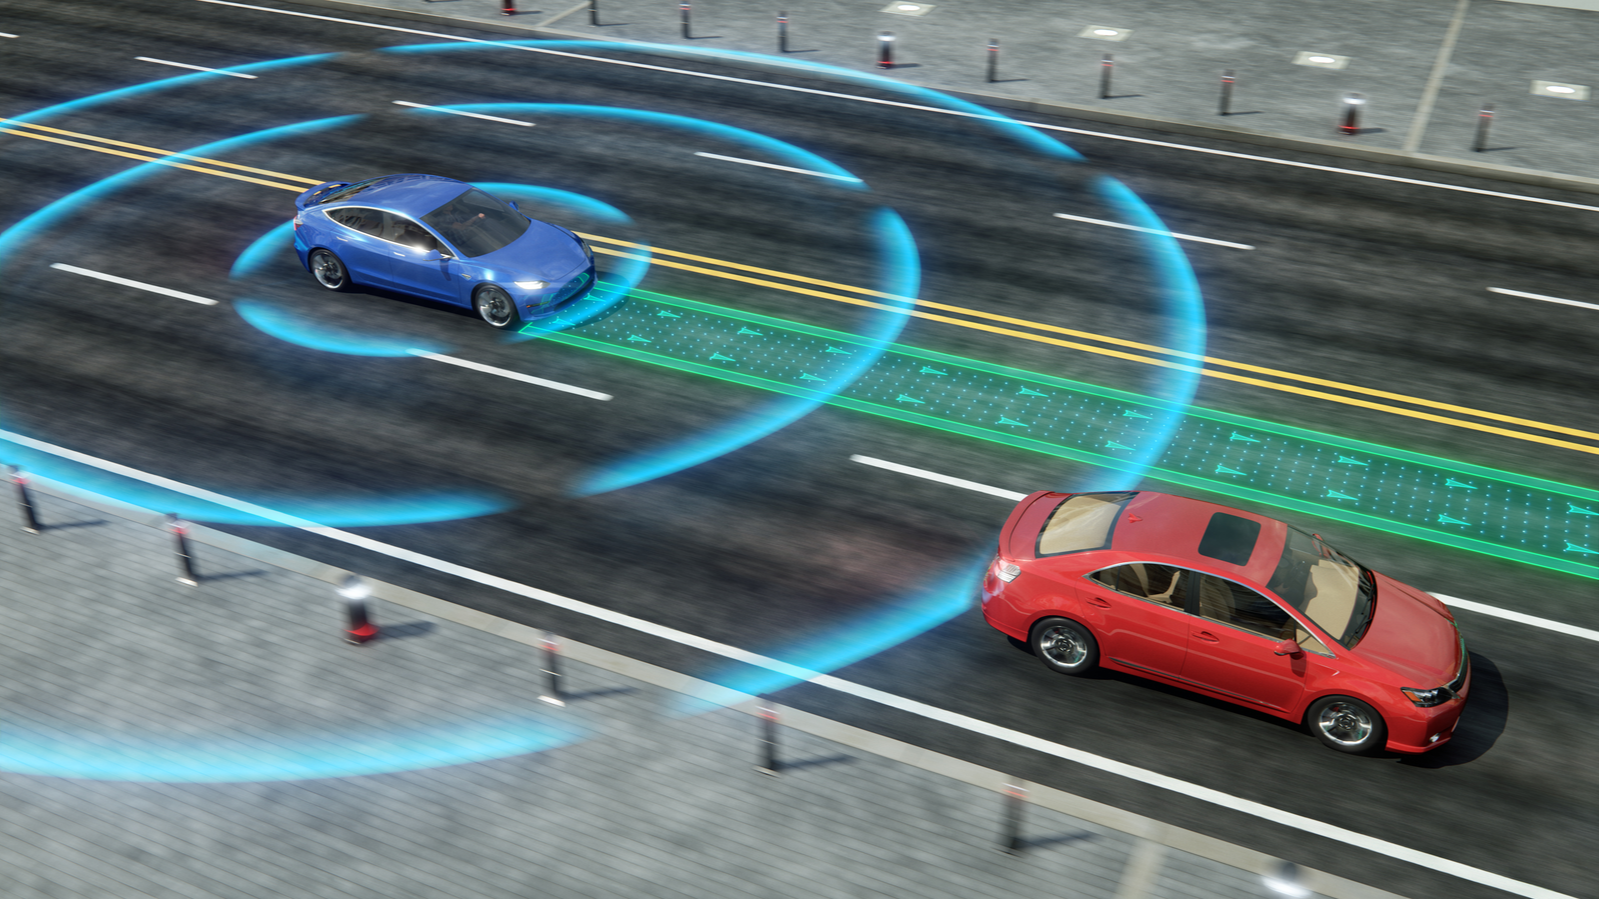 Autonomous self driving electric car using lidar change the lane and overtakes city vehicle